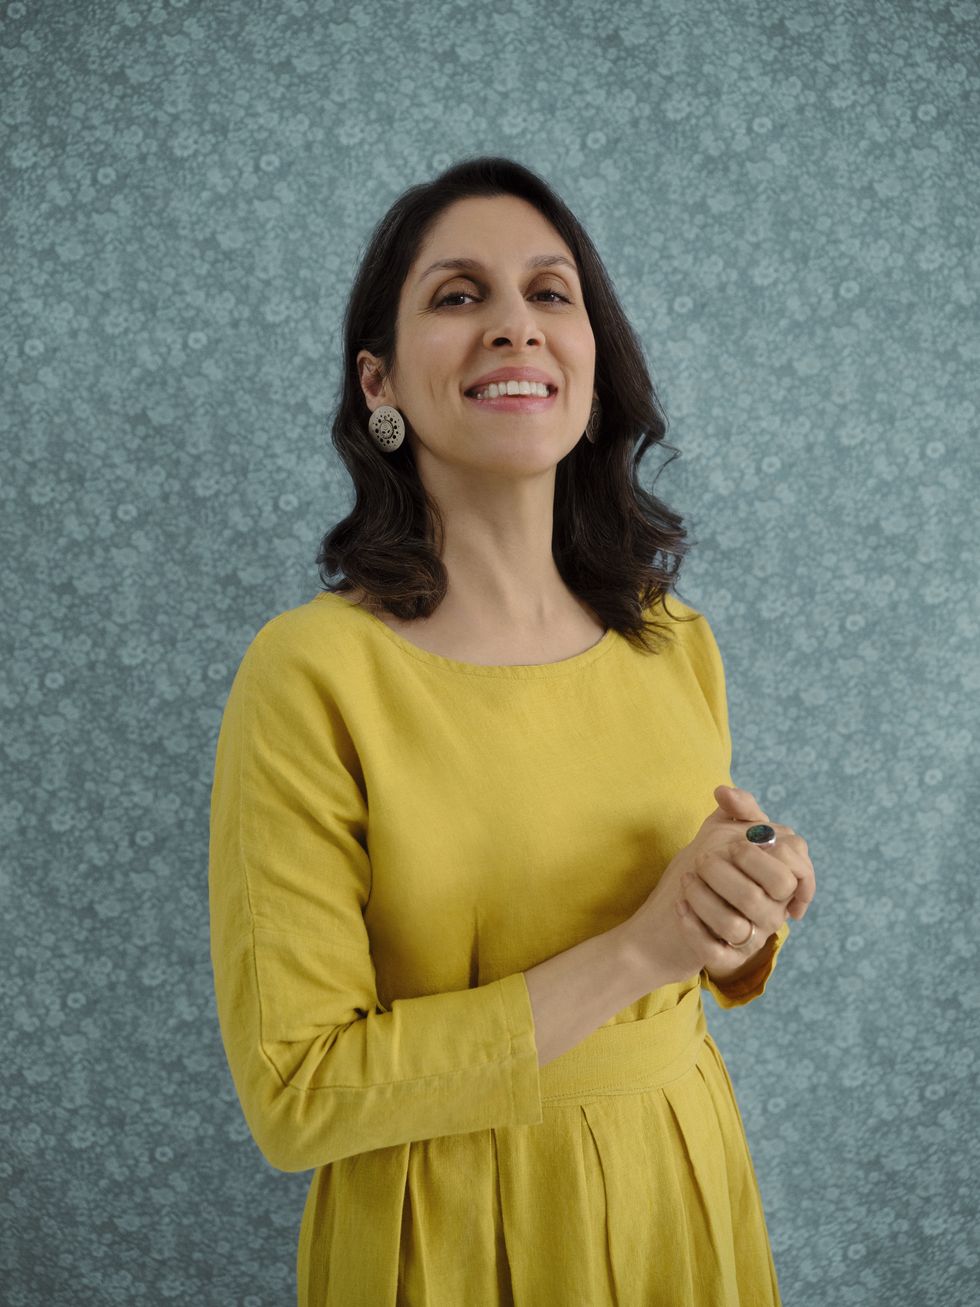 zaghari ratcliffe wearing the same mustard yellow dress, which she made in prison﻿